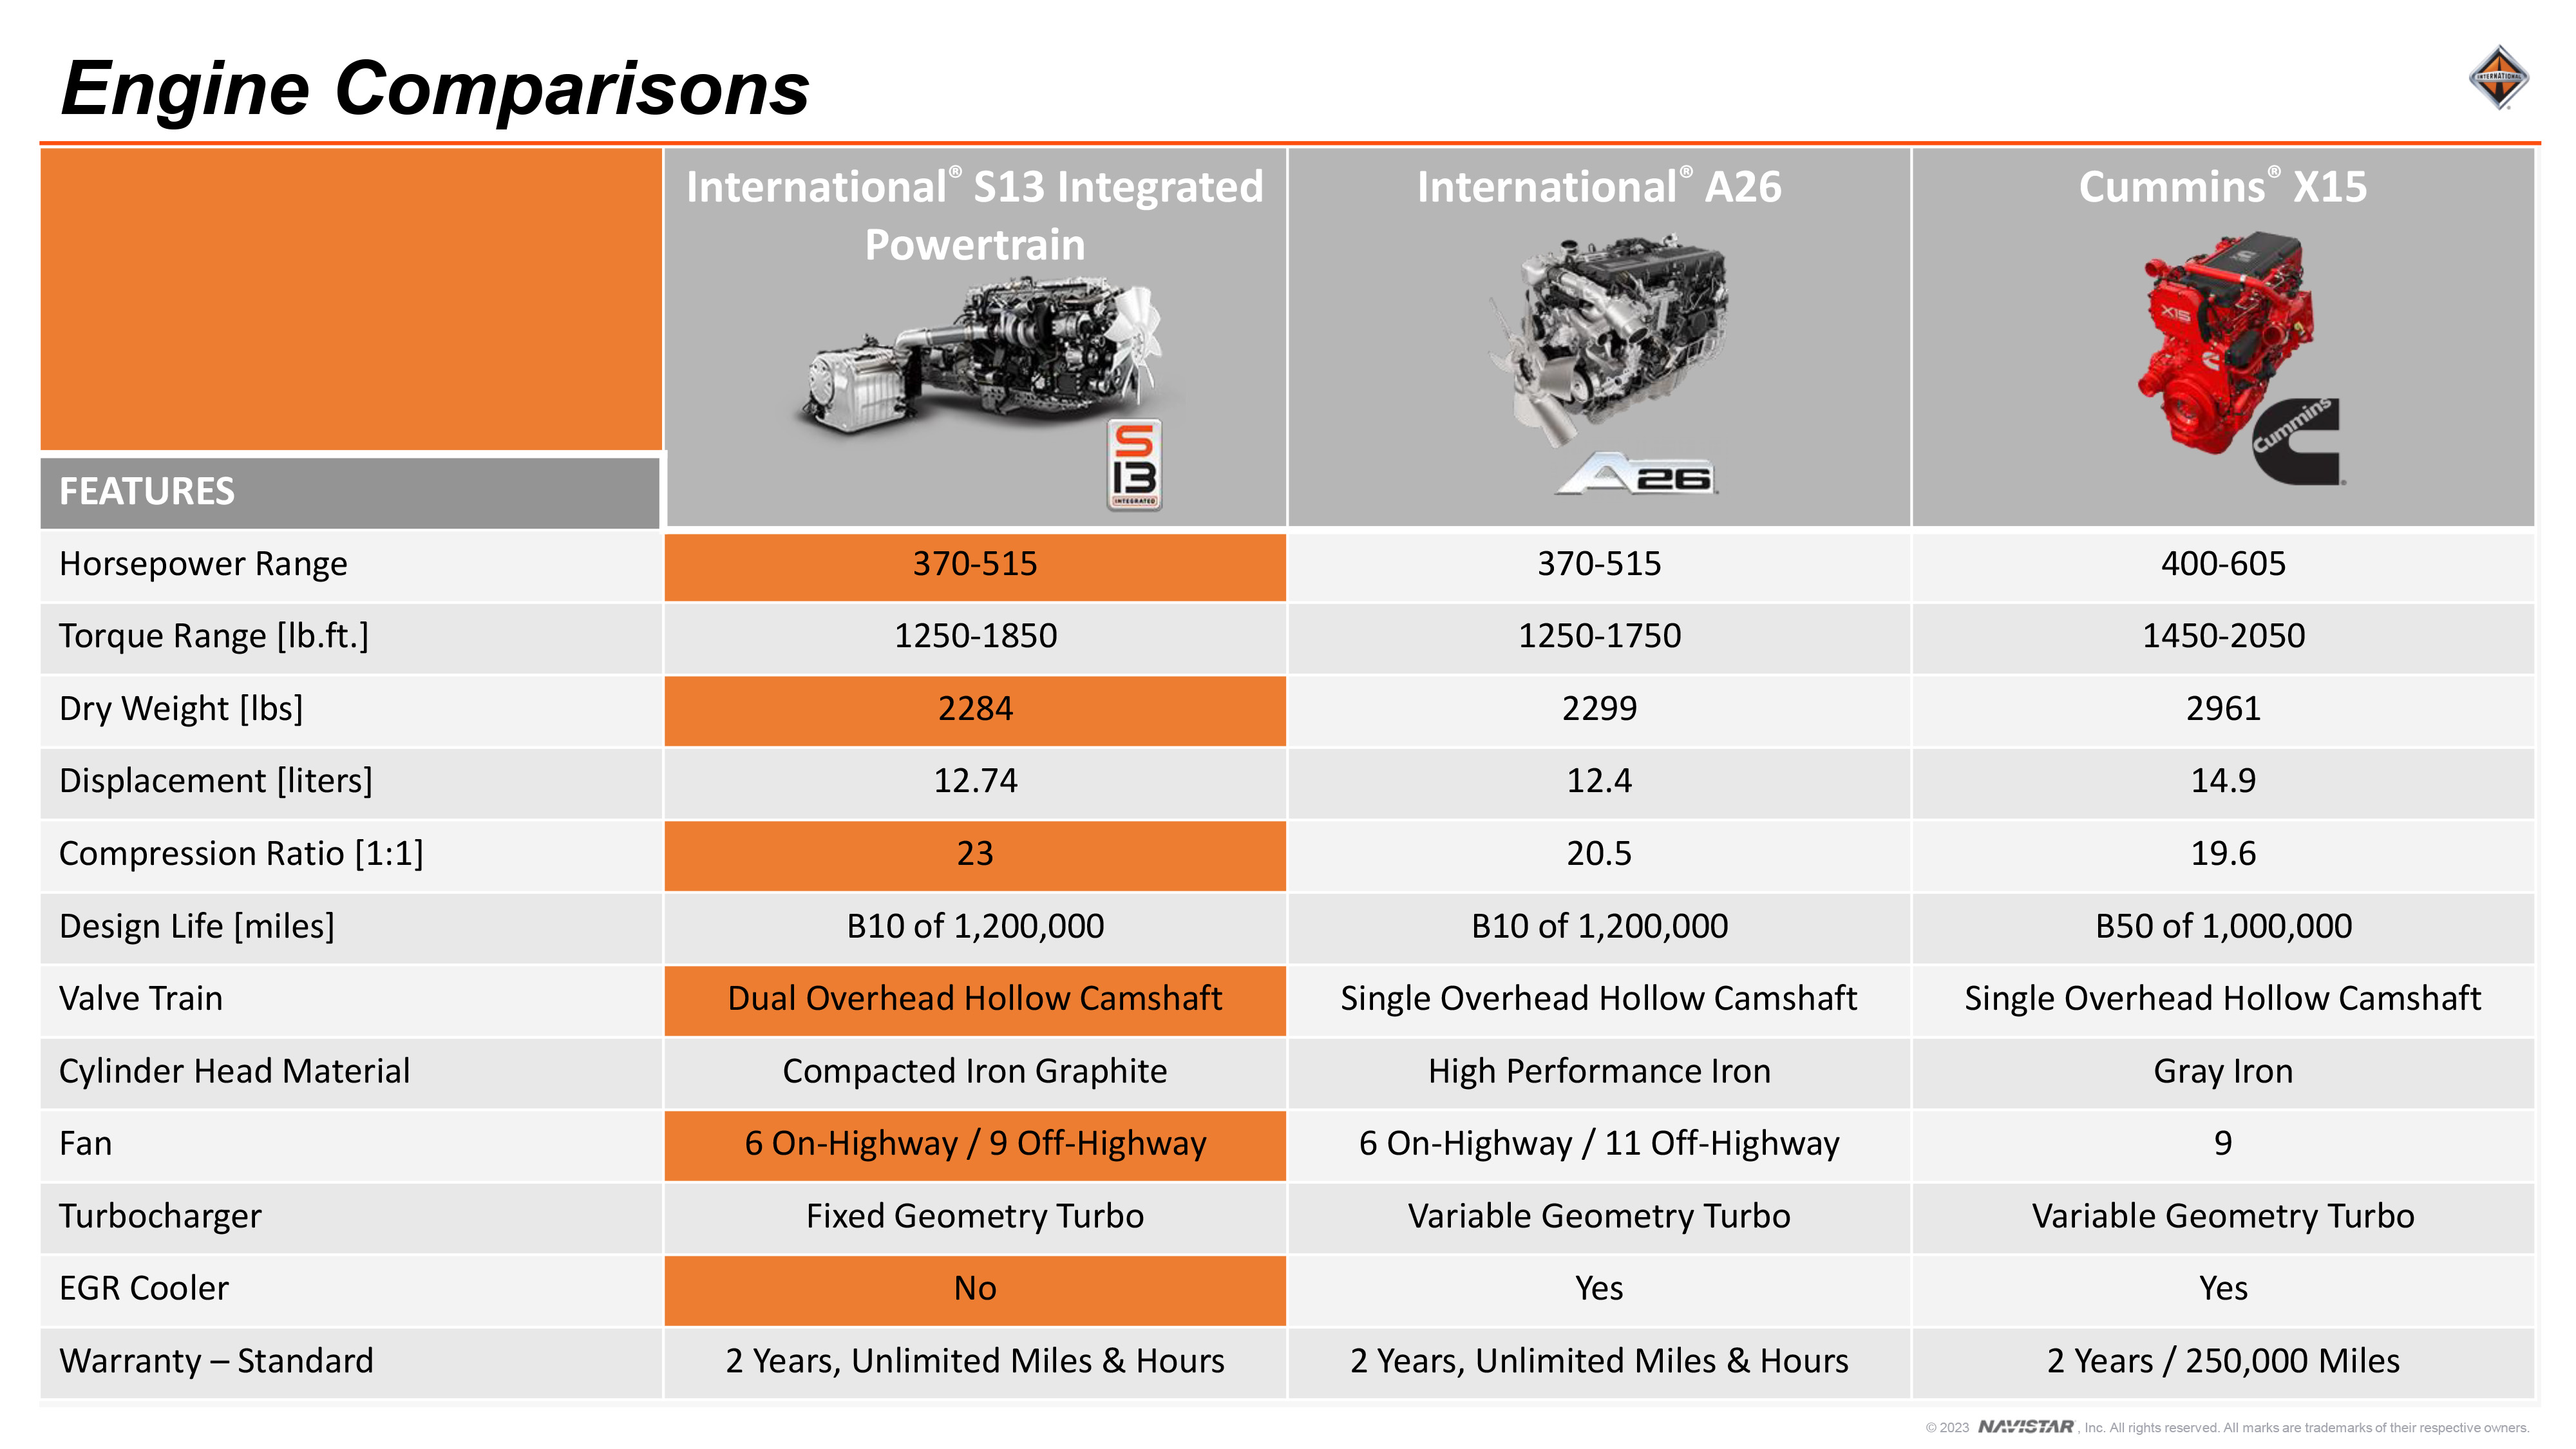 comparing the s13 engine to other engines